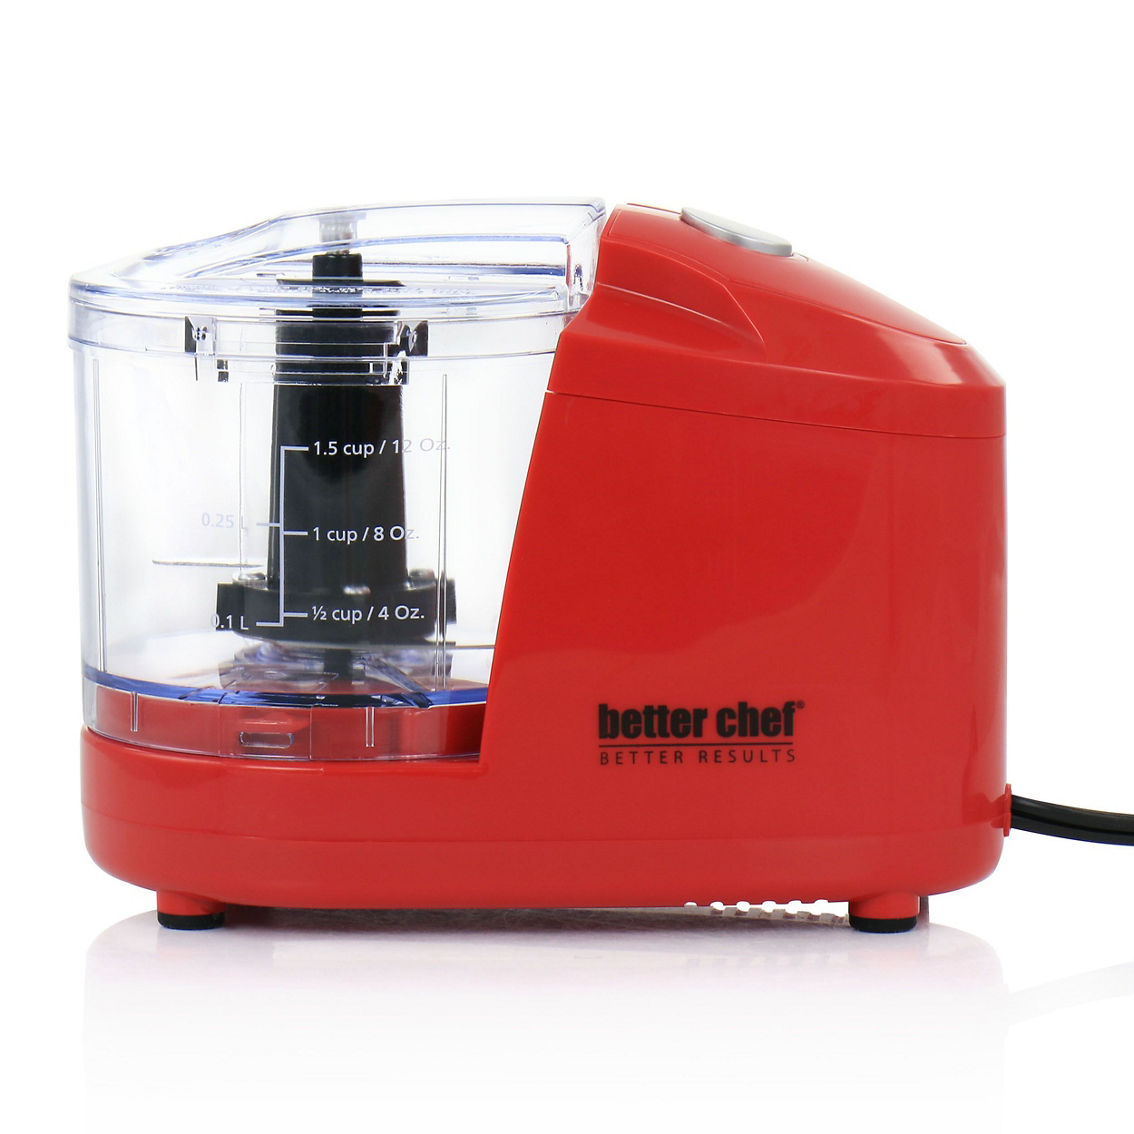 Better Chef Compact 12 Ounce Mini Chopper in Red - Image 2 of 5